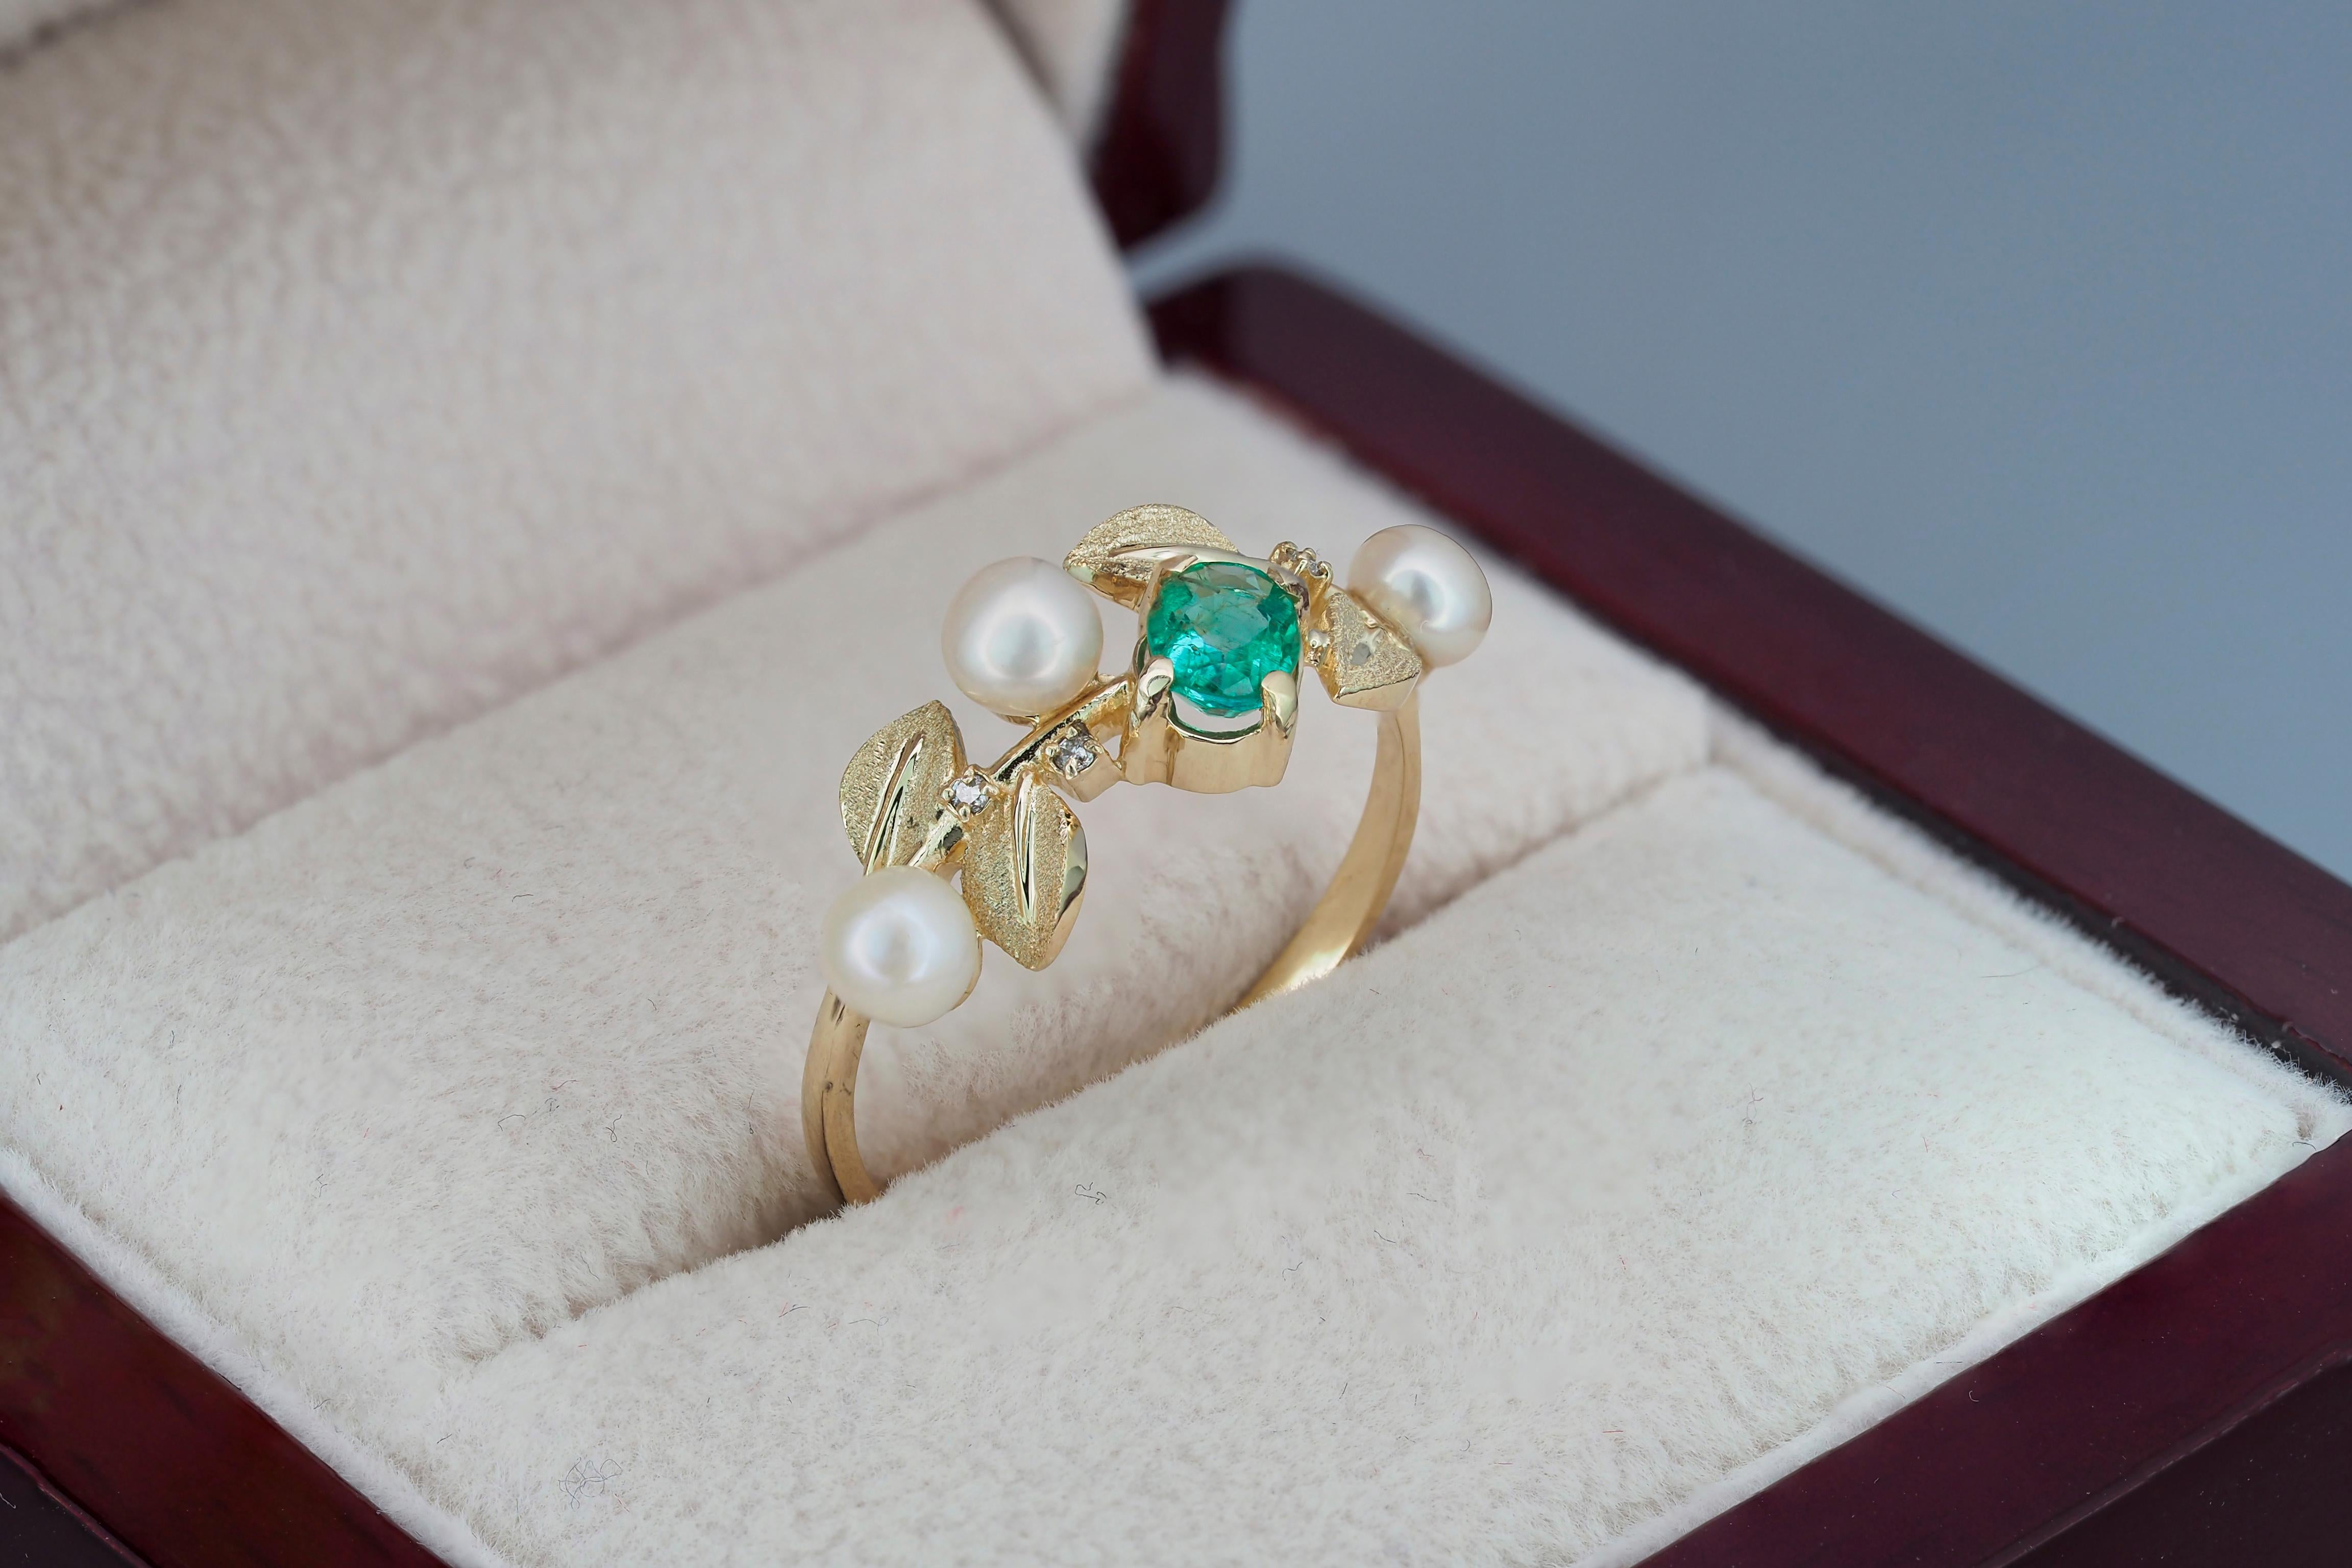 For Sale:  14k Gold Ring with Emerald, Pearls and Diamonds 6